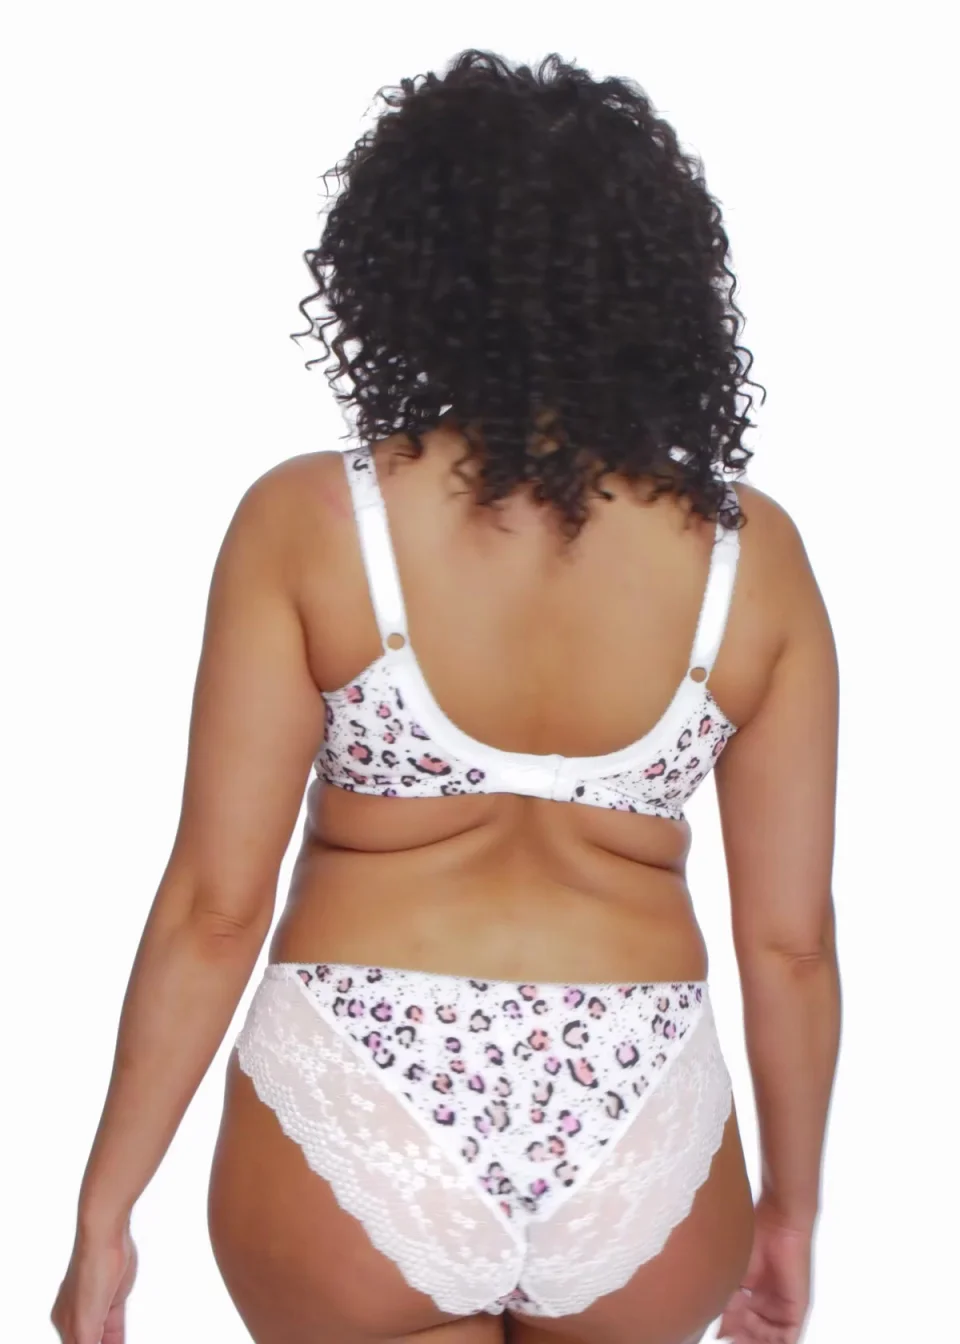 Collection Magnifique - Graduated cup bra and brazilian panty